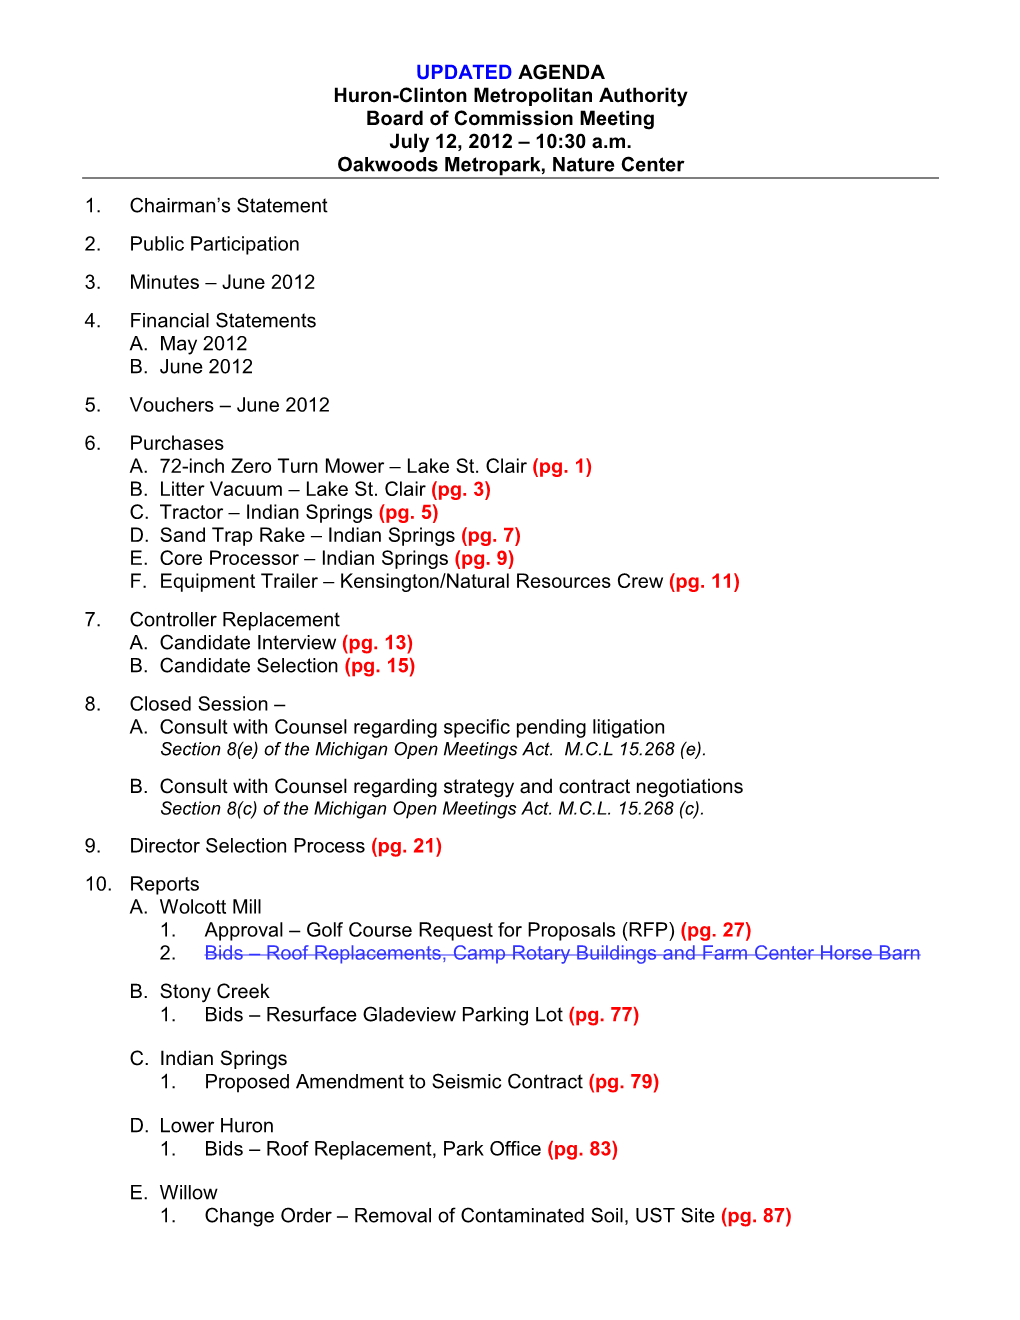 UPDATED AGENDA Huron-Clinton Metropolitan Authority Board of Commission Meeting July 12, 2012 – 10:30 A.M